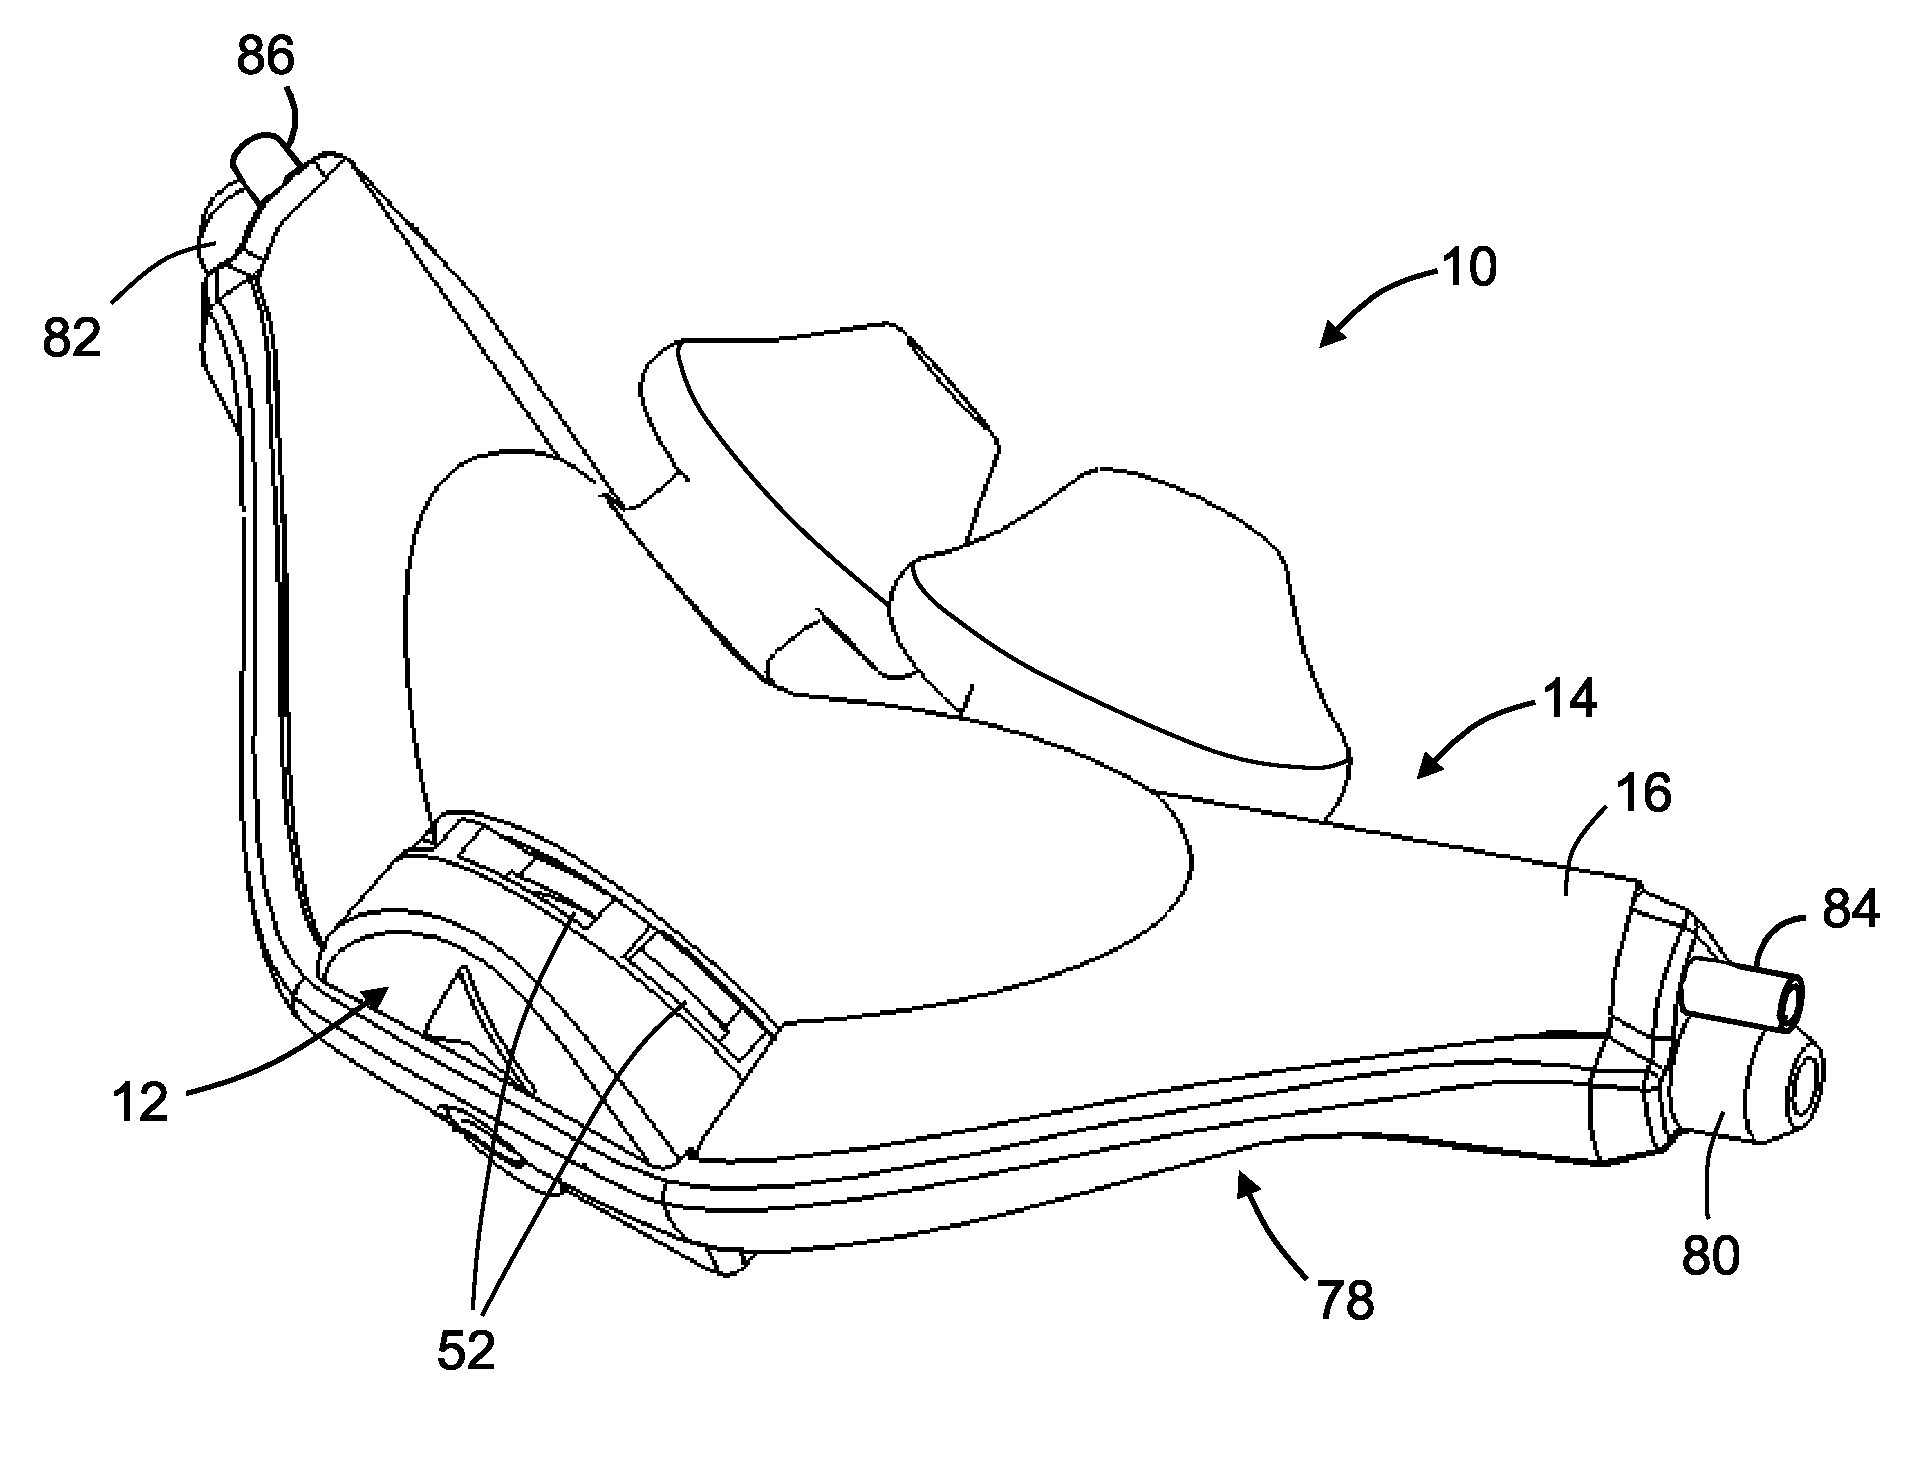 Ventilation mask with integrated piloted exhalation valve